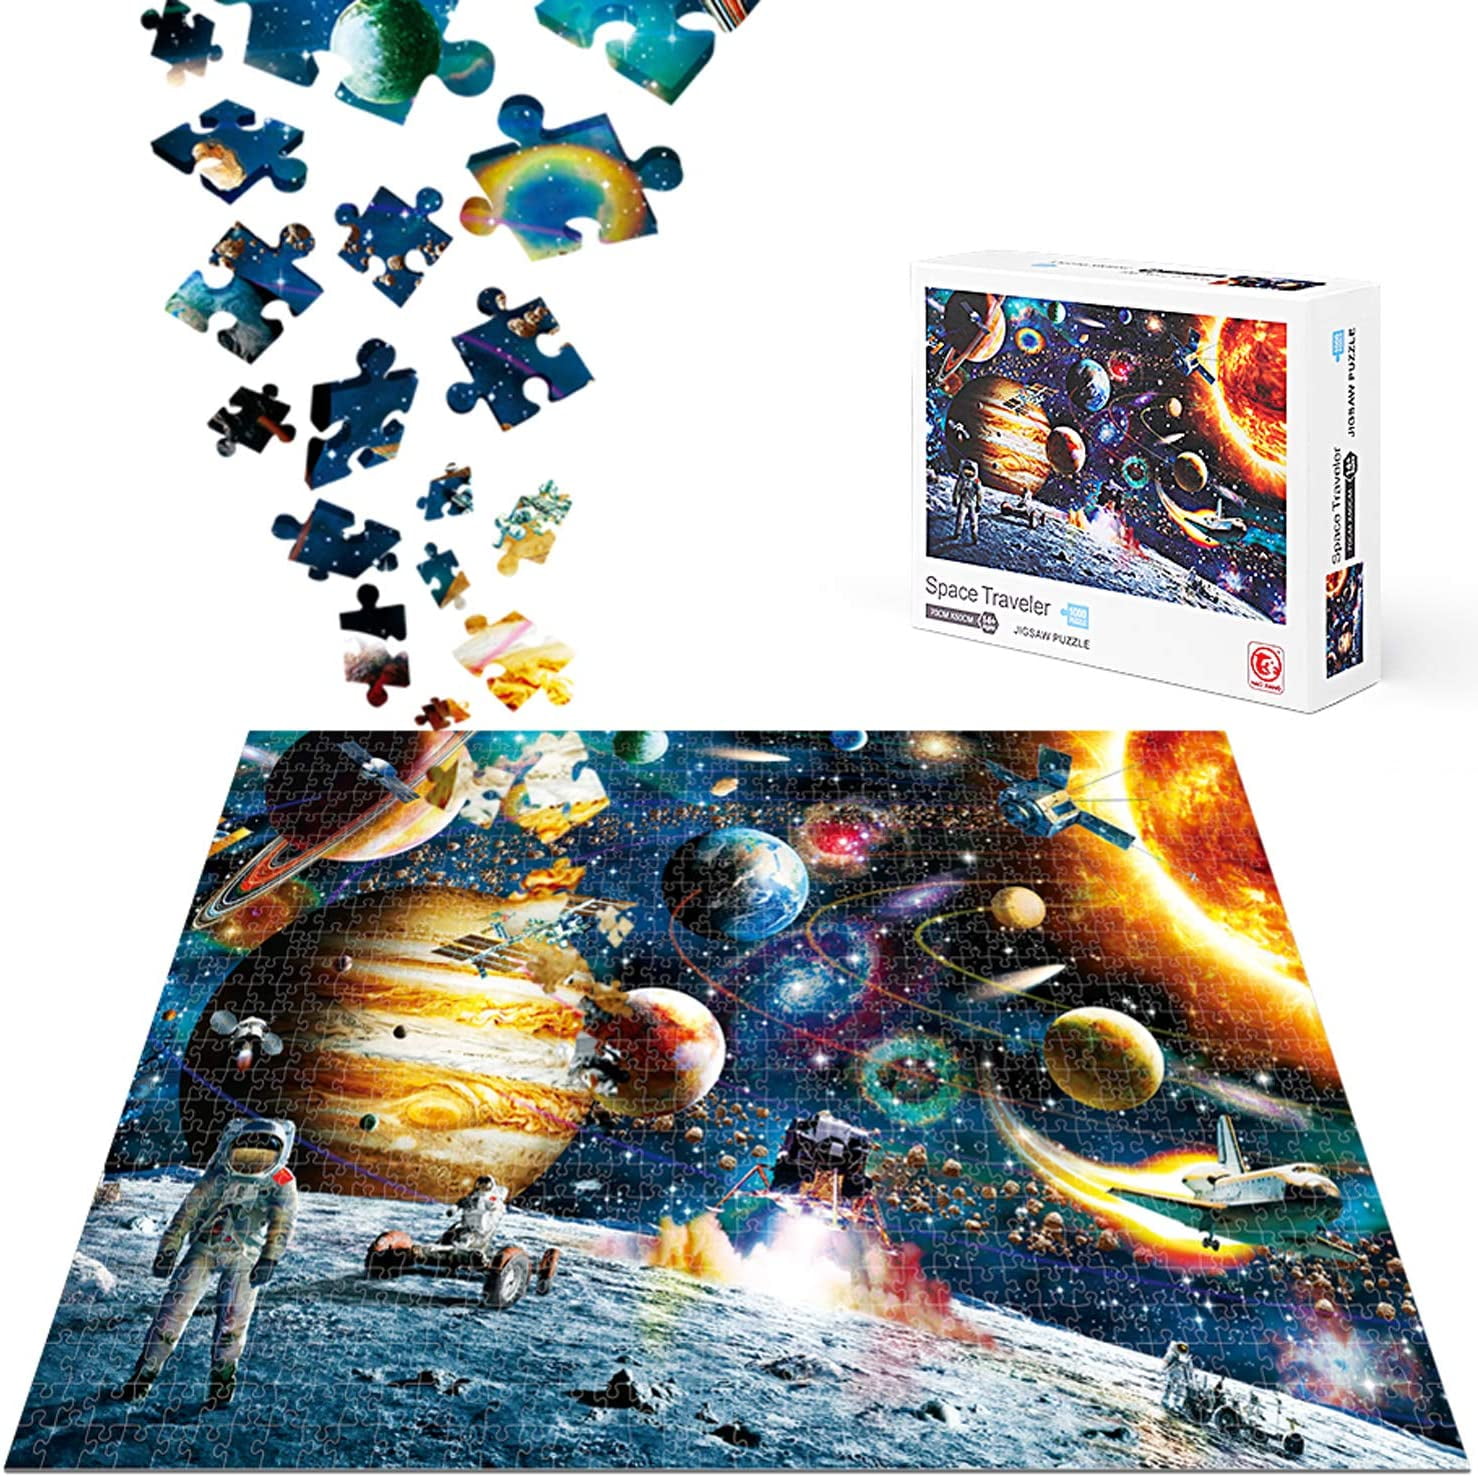 Best Gifts for Adults and Kids. Game Toys Gift Puzzles,Landscape-5000piece Wooden Jigsaw Puzzles